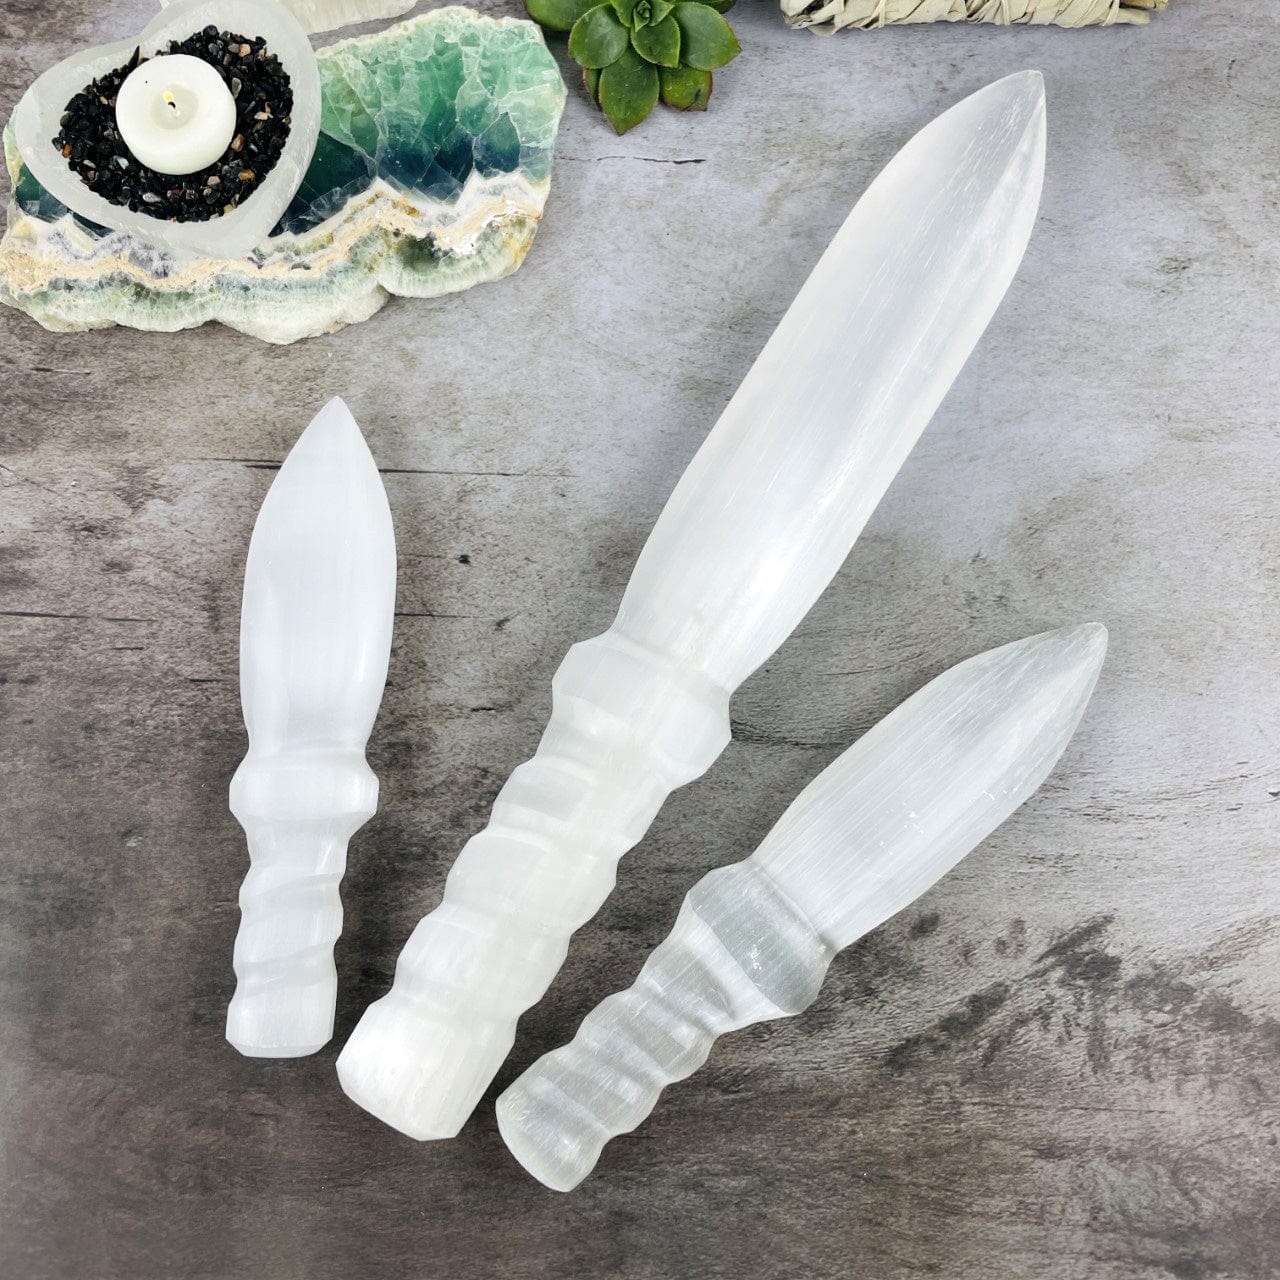 3 sizes of Selenite Knives with Twisted Handles